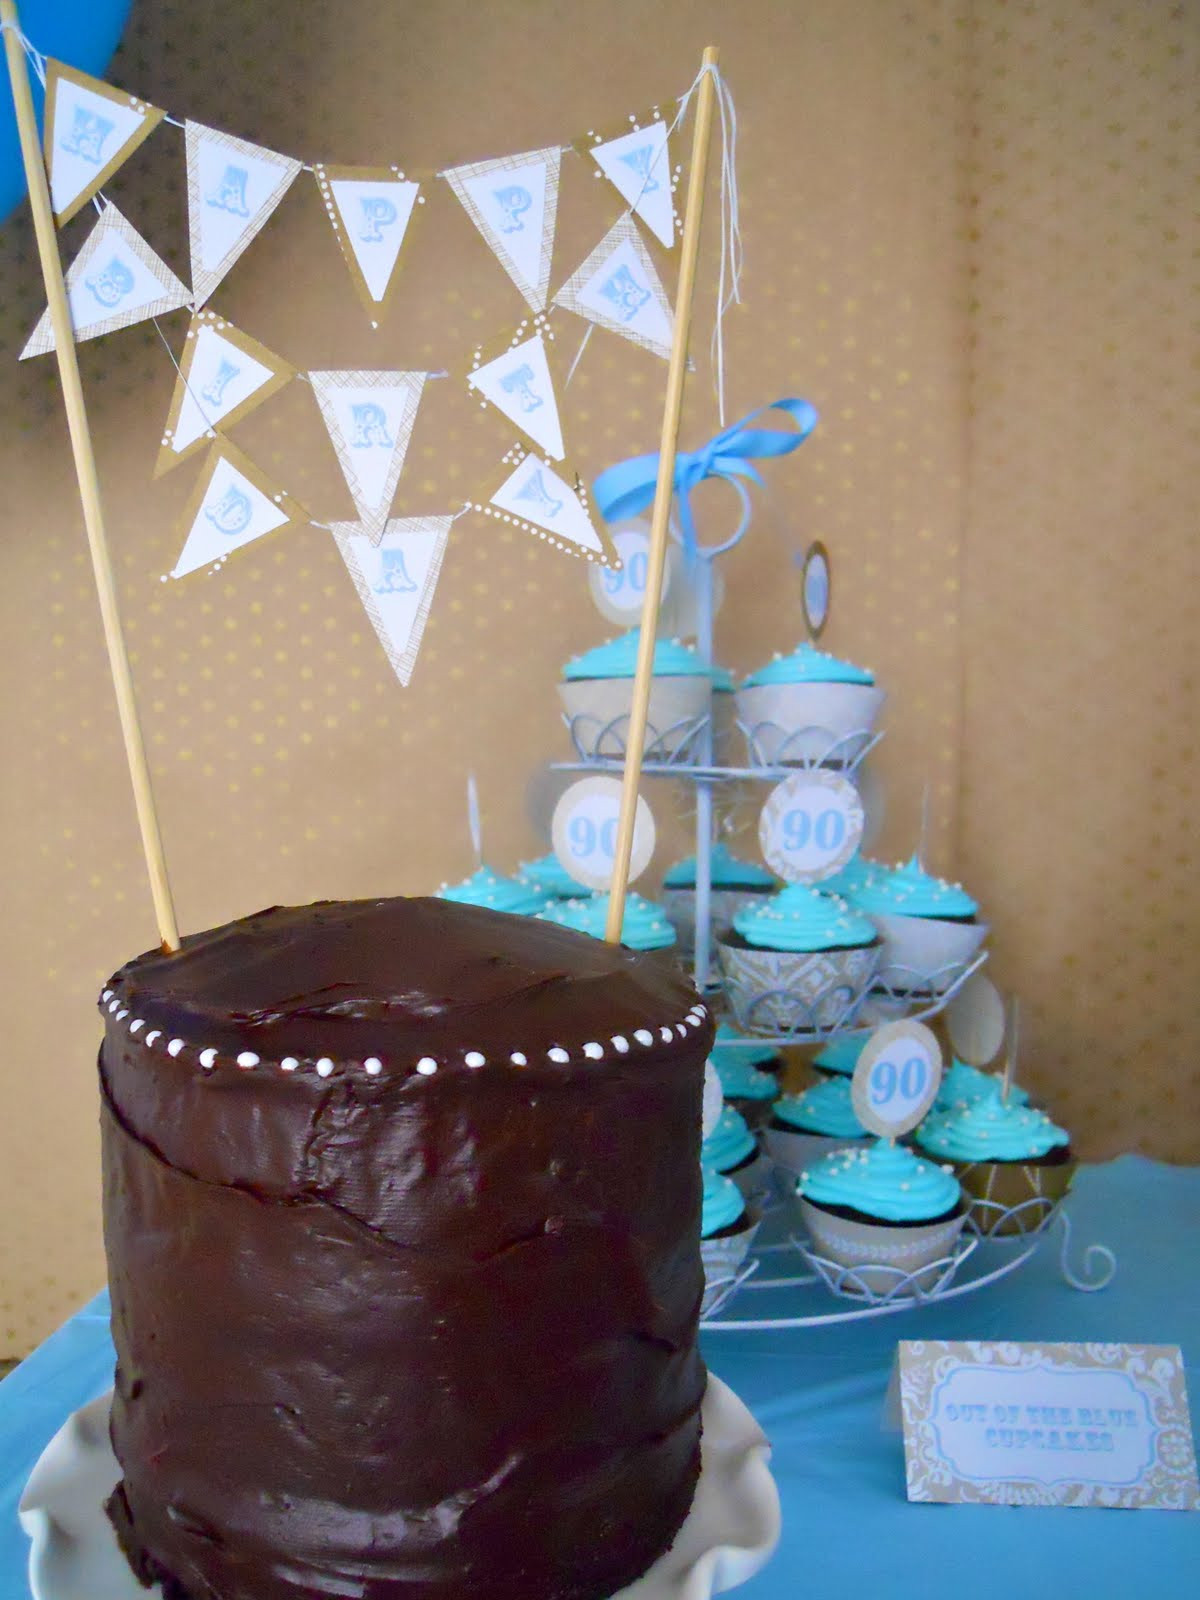 How To Decorate For A Birthday Party
 Oh Sugar Events 90th Birthday Party